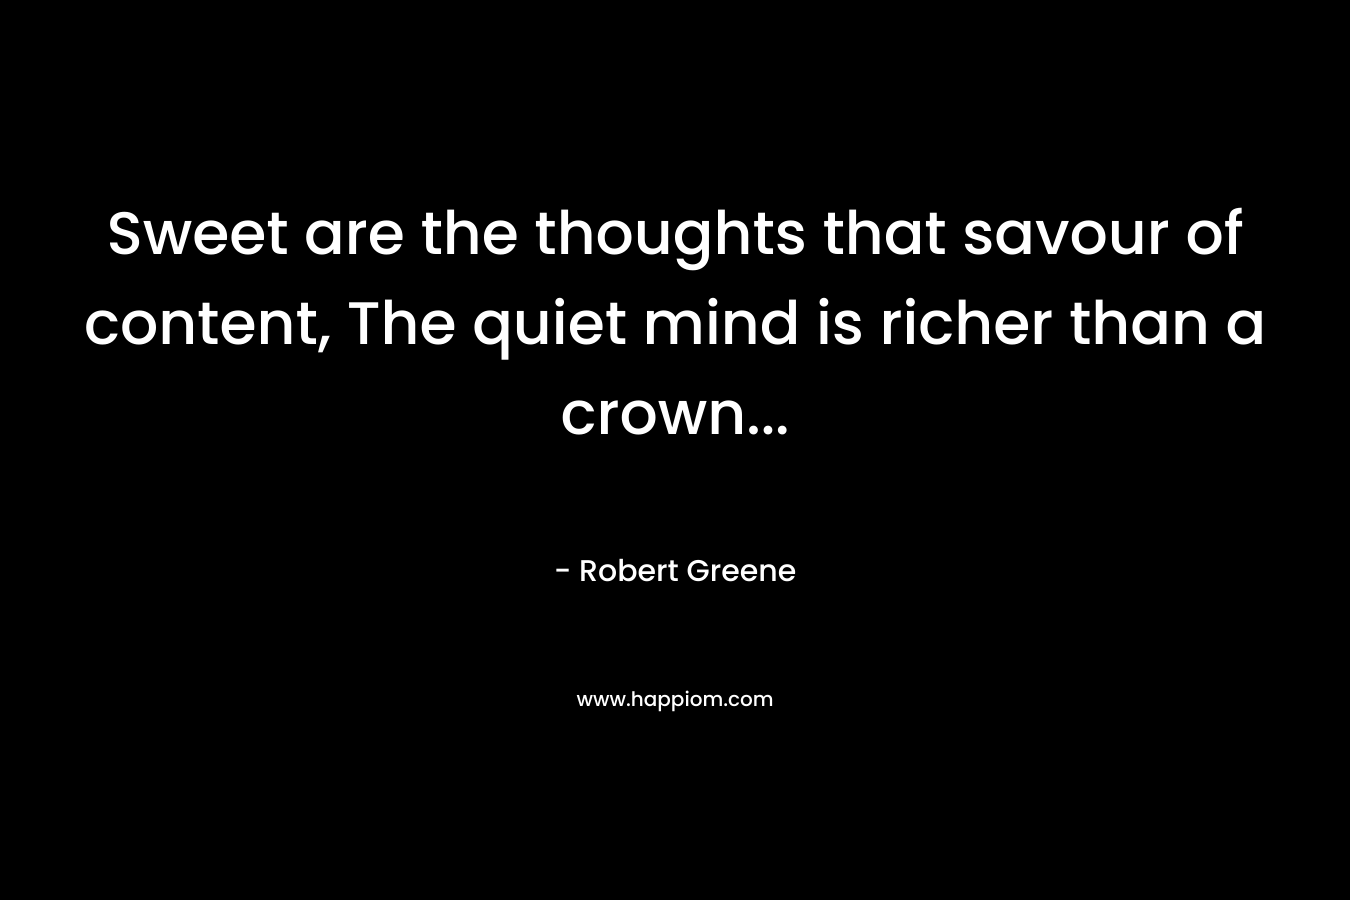 Sweet are the thoughts that savour of content, The quiet mind is richer than a crown...